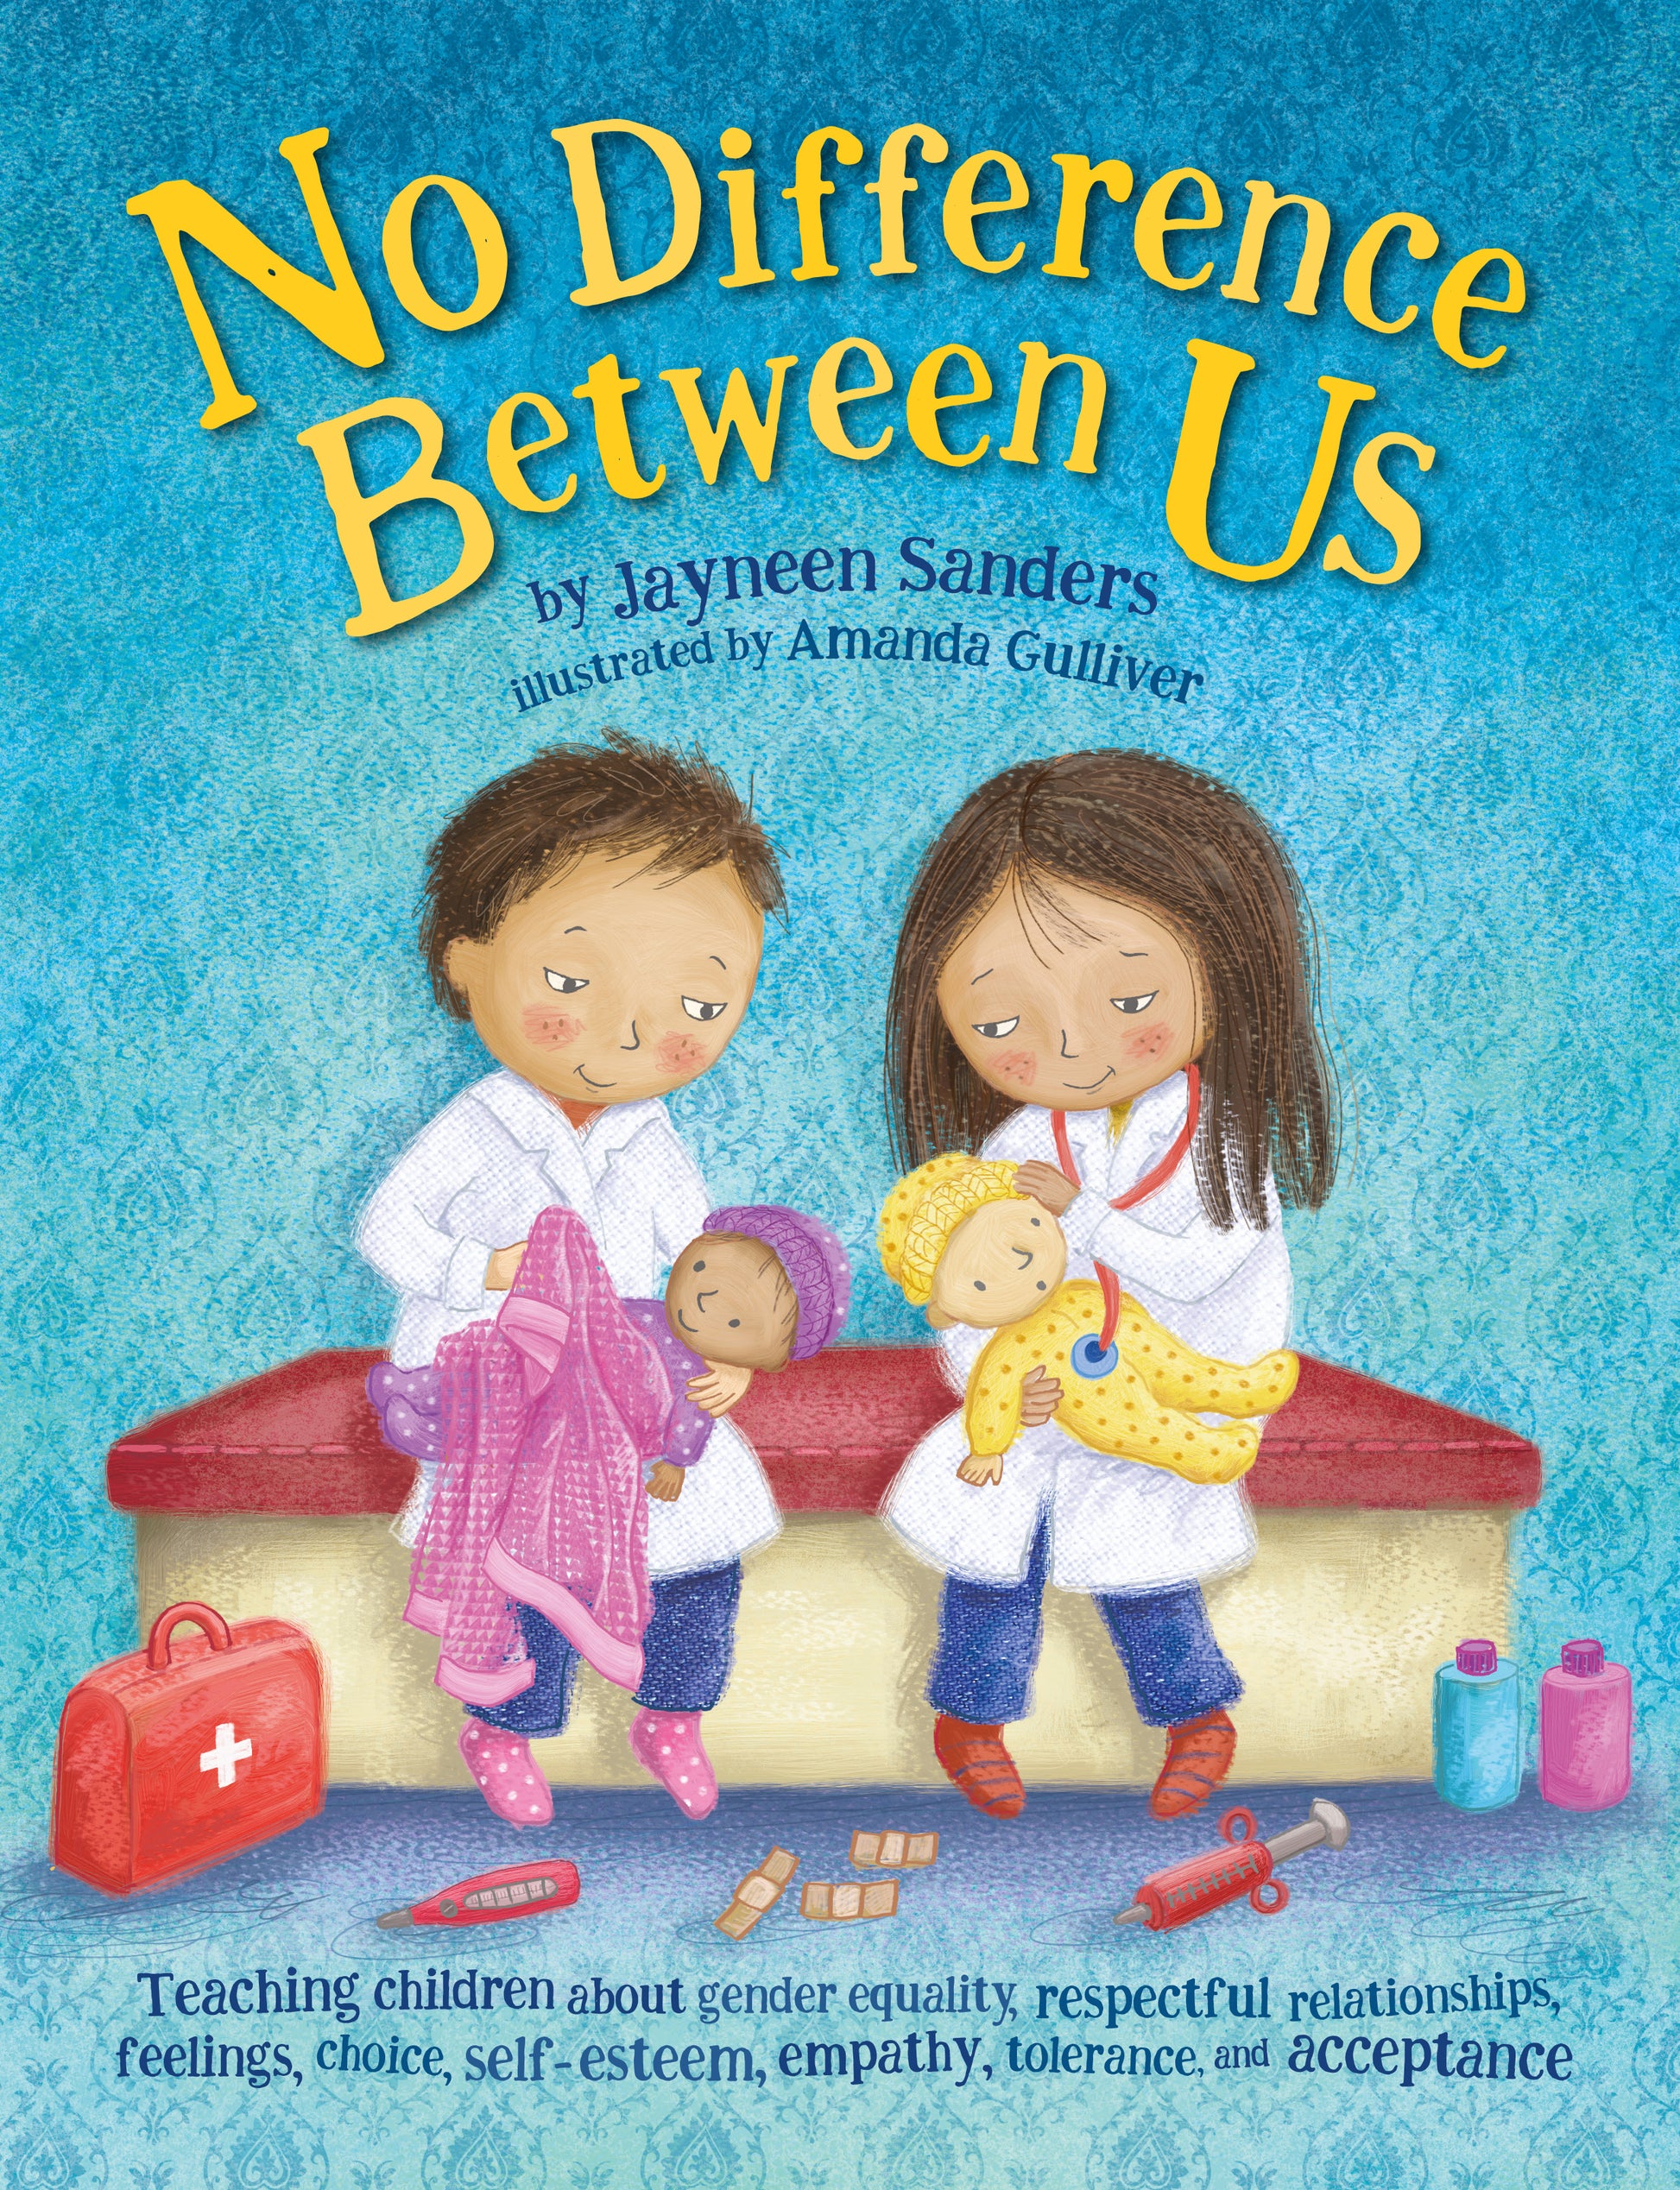 The cover of the book ‘No Difference Between Us’ by Jayneen Sanders.